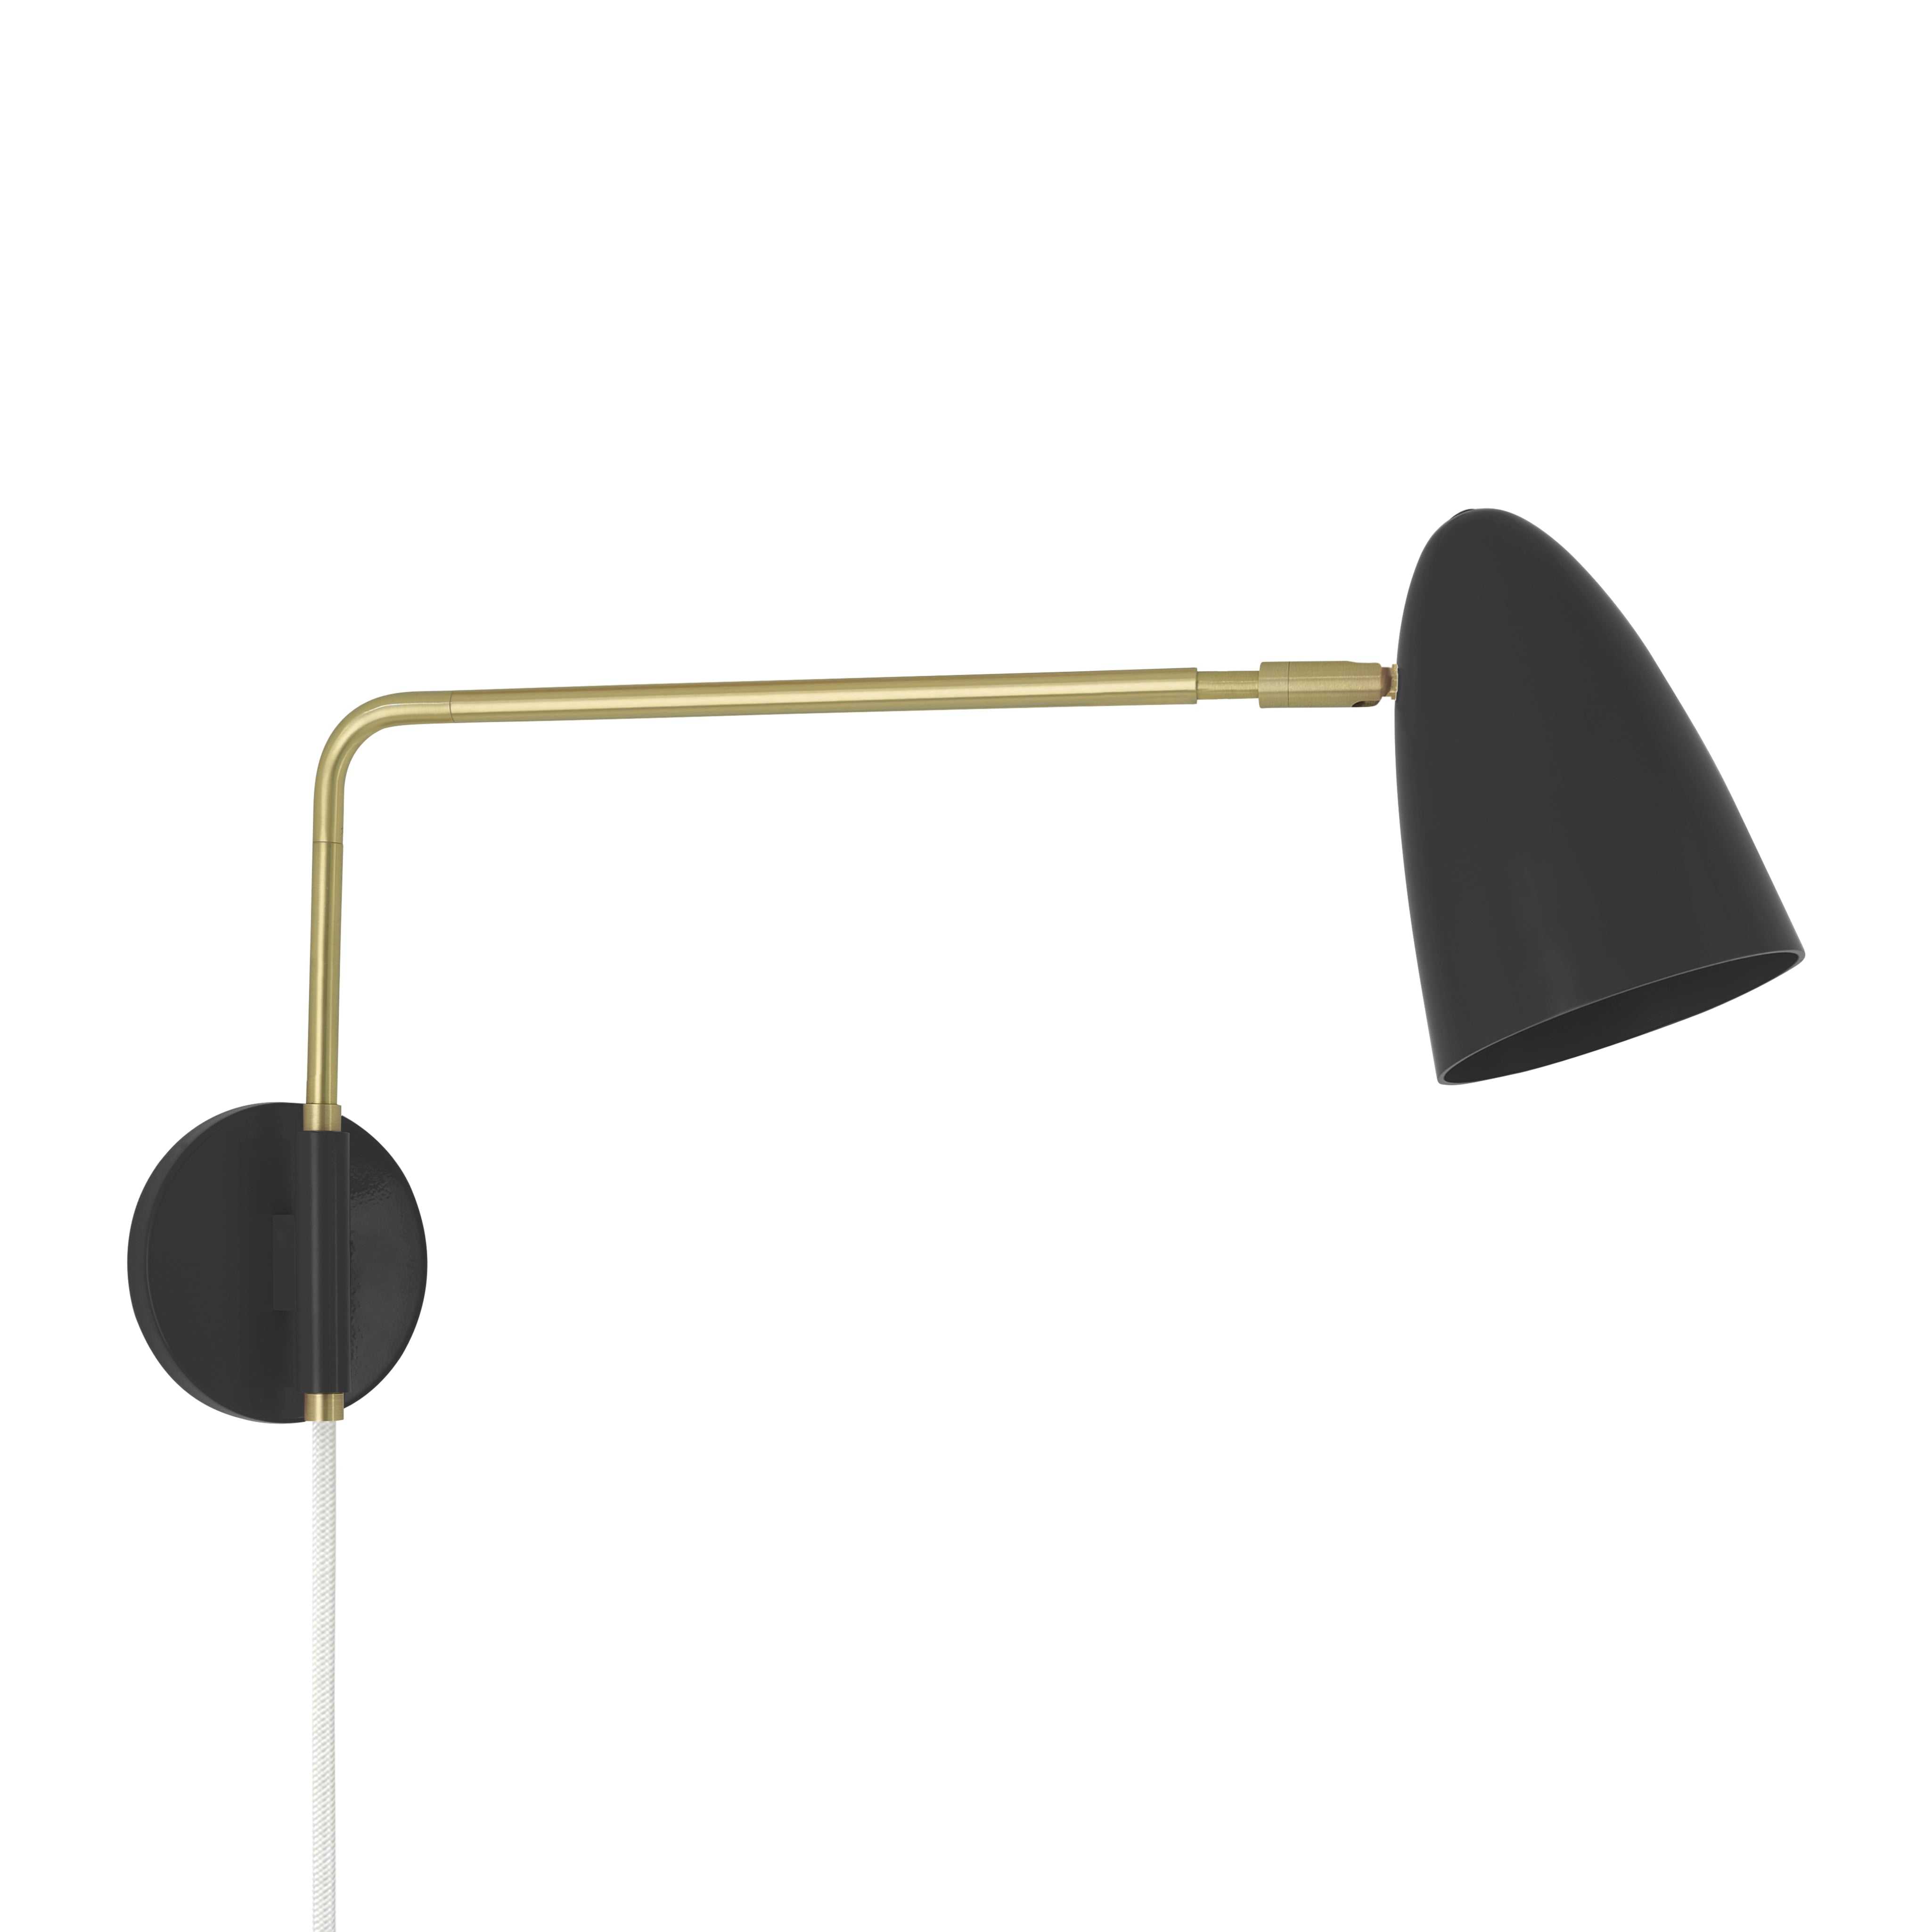 Brass and black color Boom Swing Arm plug-in sconce Dutton Brown lighting